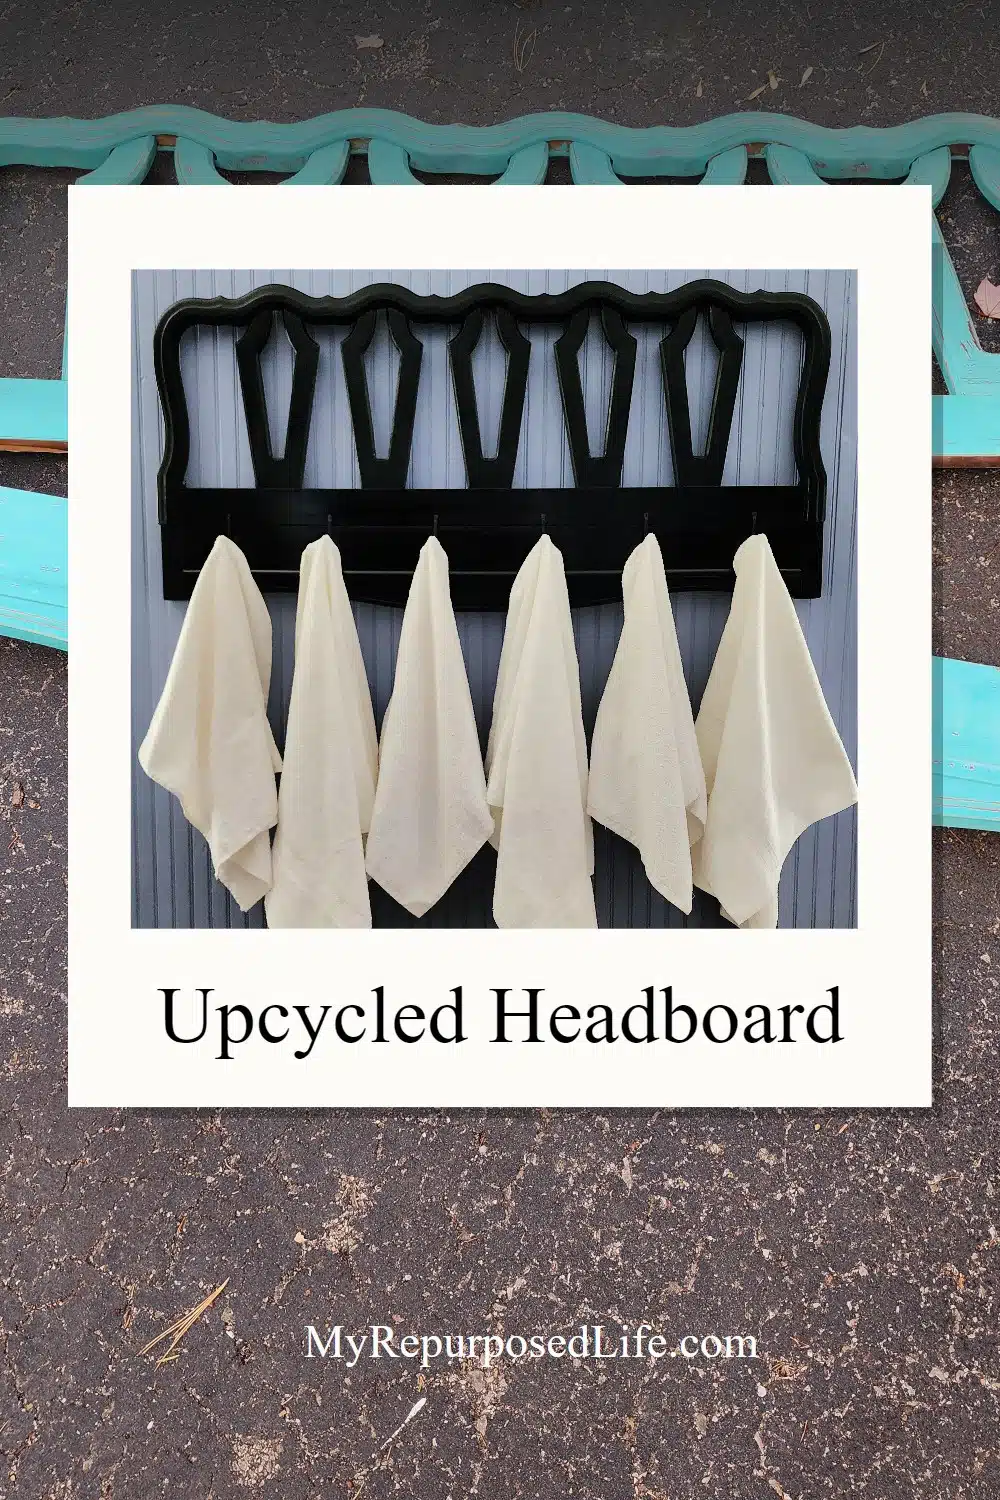 How to make a queen headboard coat rack out of a thrift store find. Tips for adding coat hooks and d-rings. More ideas for old headboards. via @repurposedlife